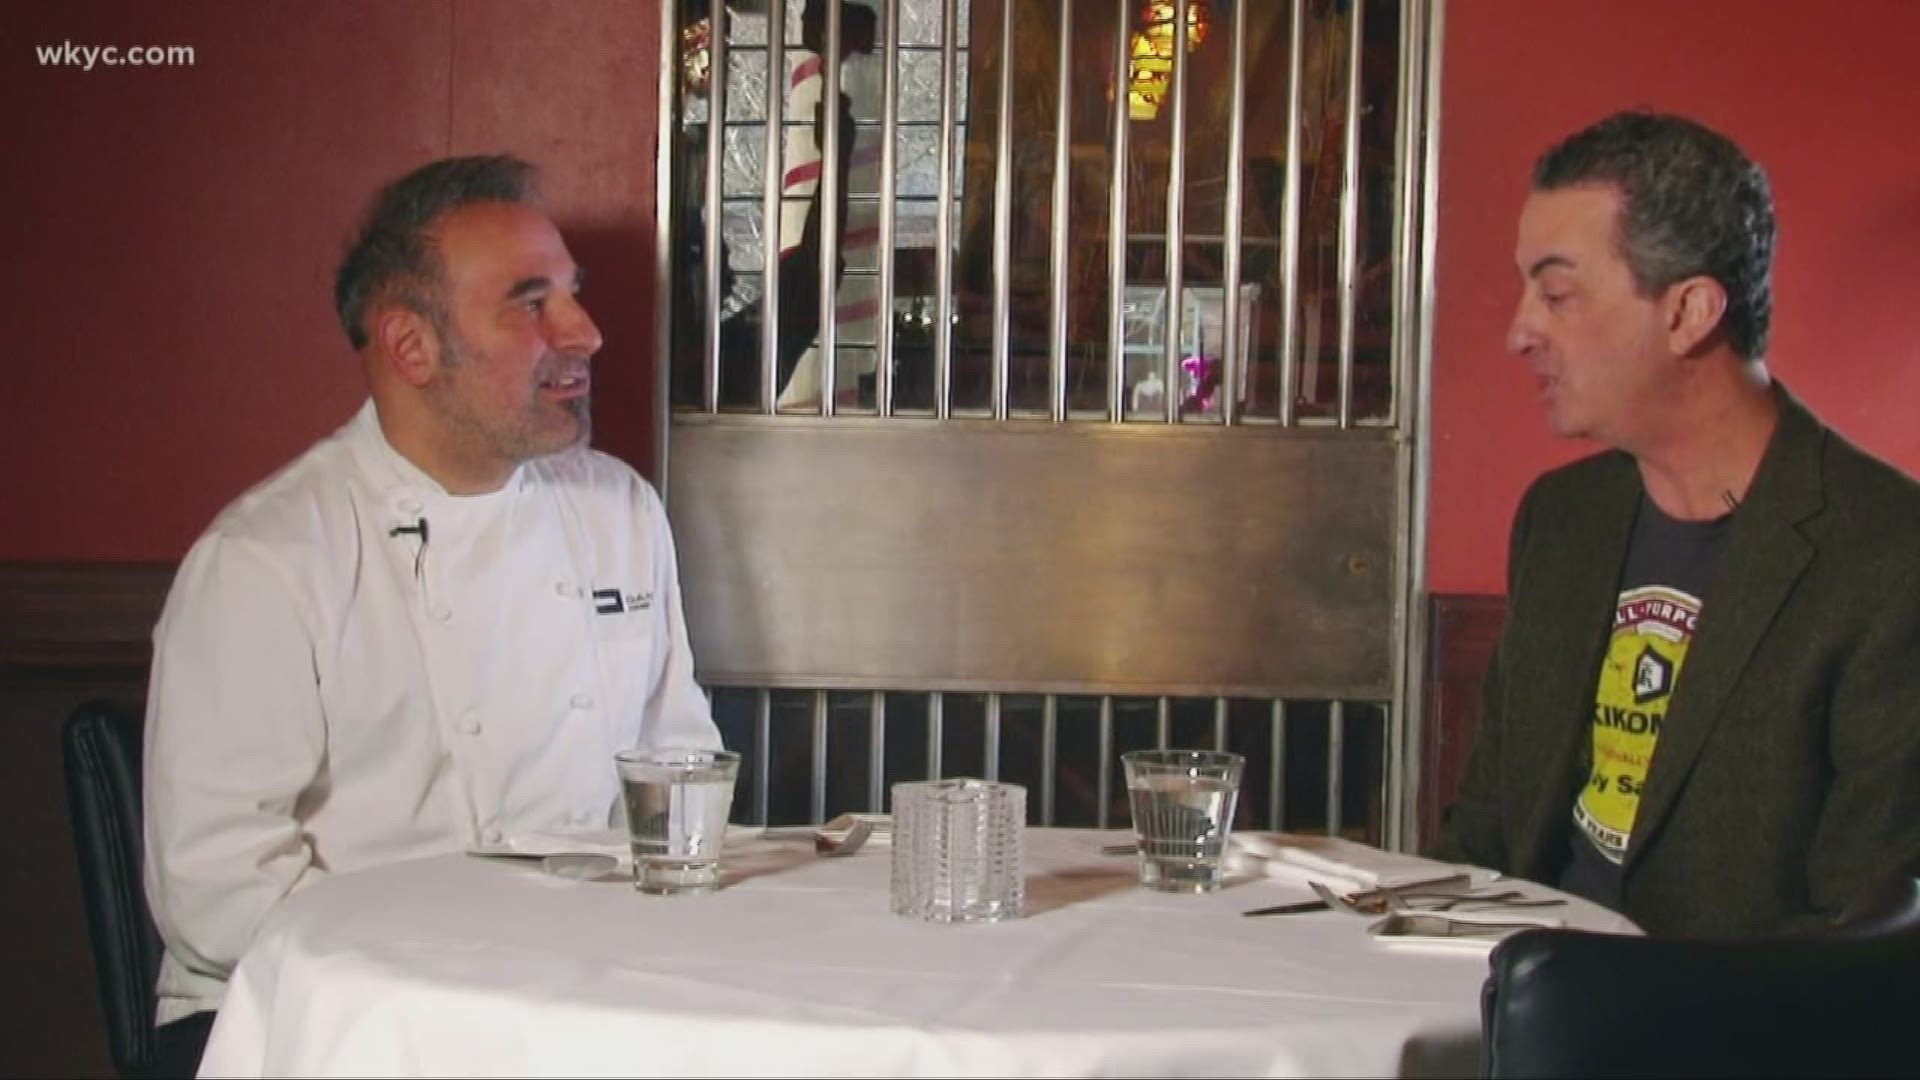 Dante Boccuzzi just celebrated 10 years of his Tremont restaurant and flagship location, Dante. He sat down with 3News' Doug Trattner.